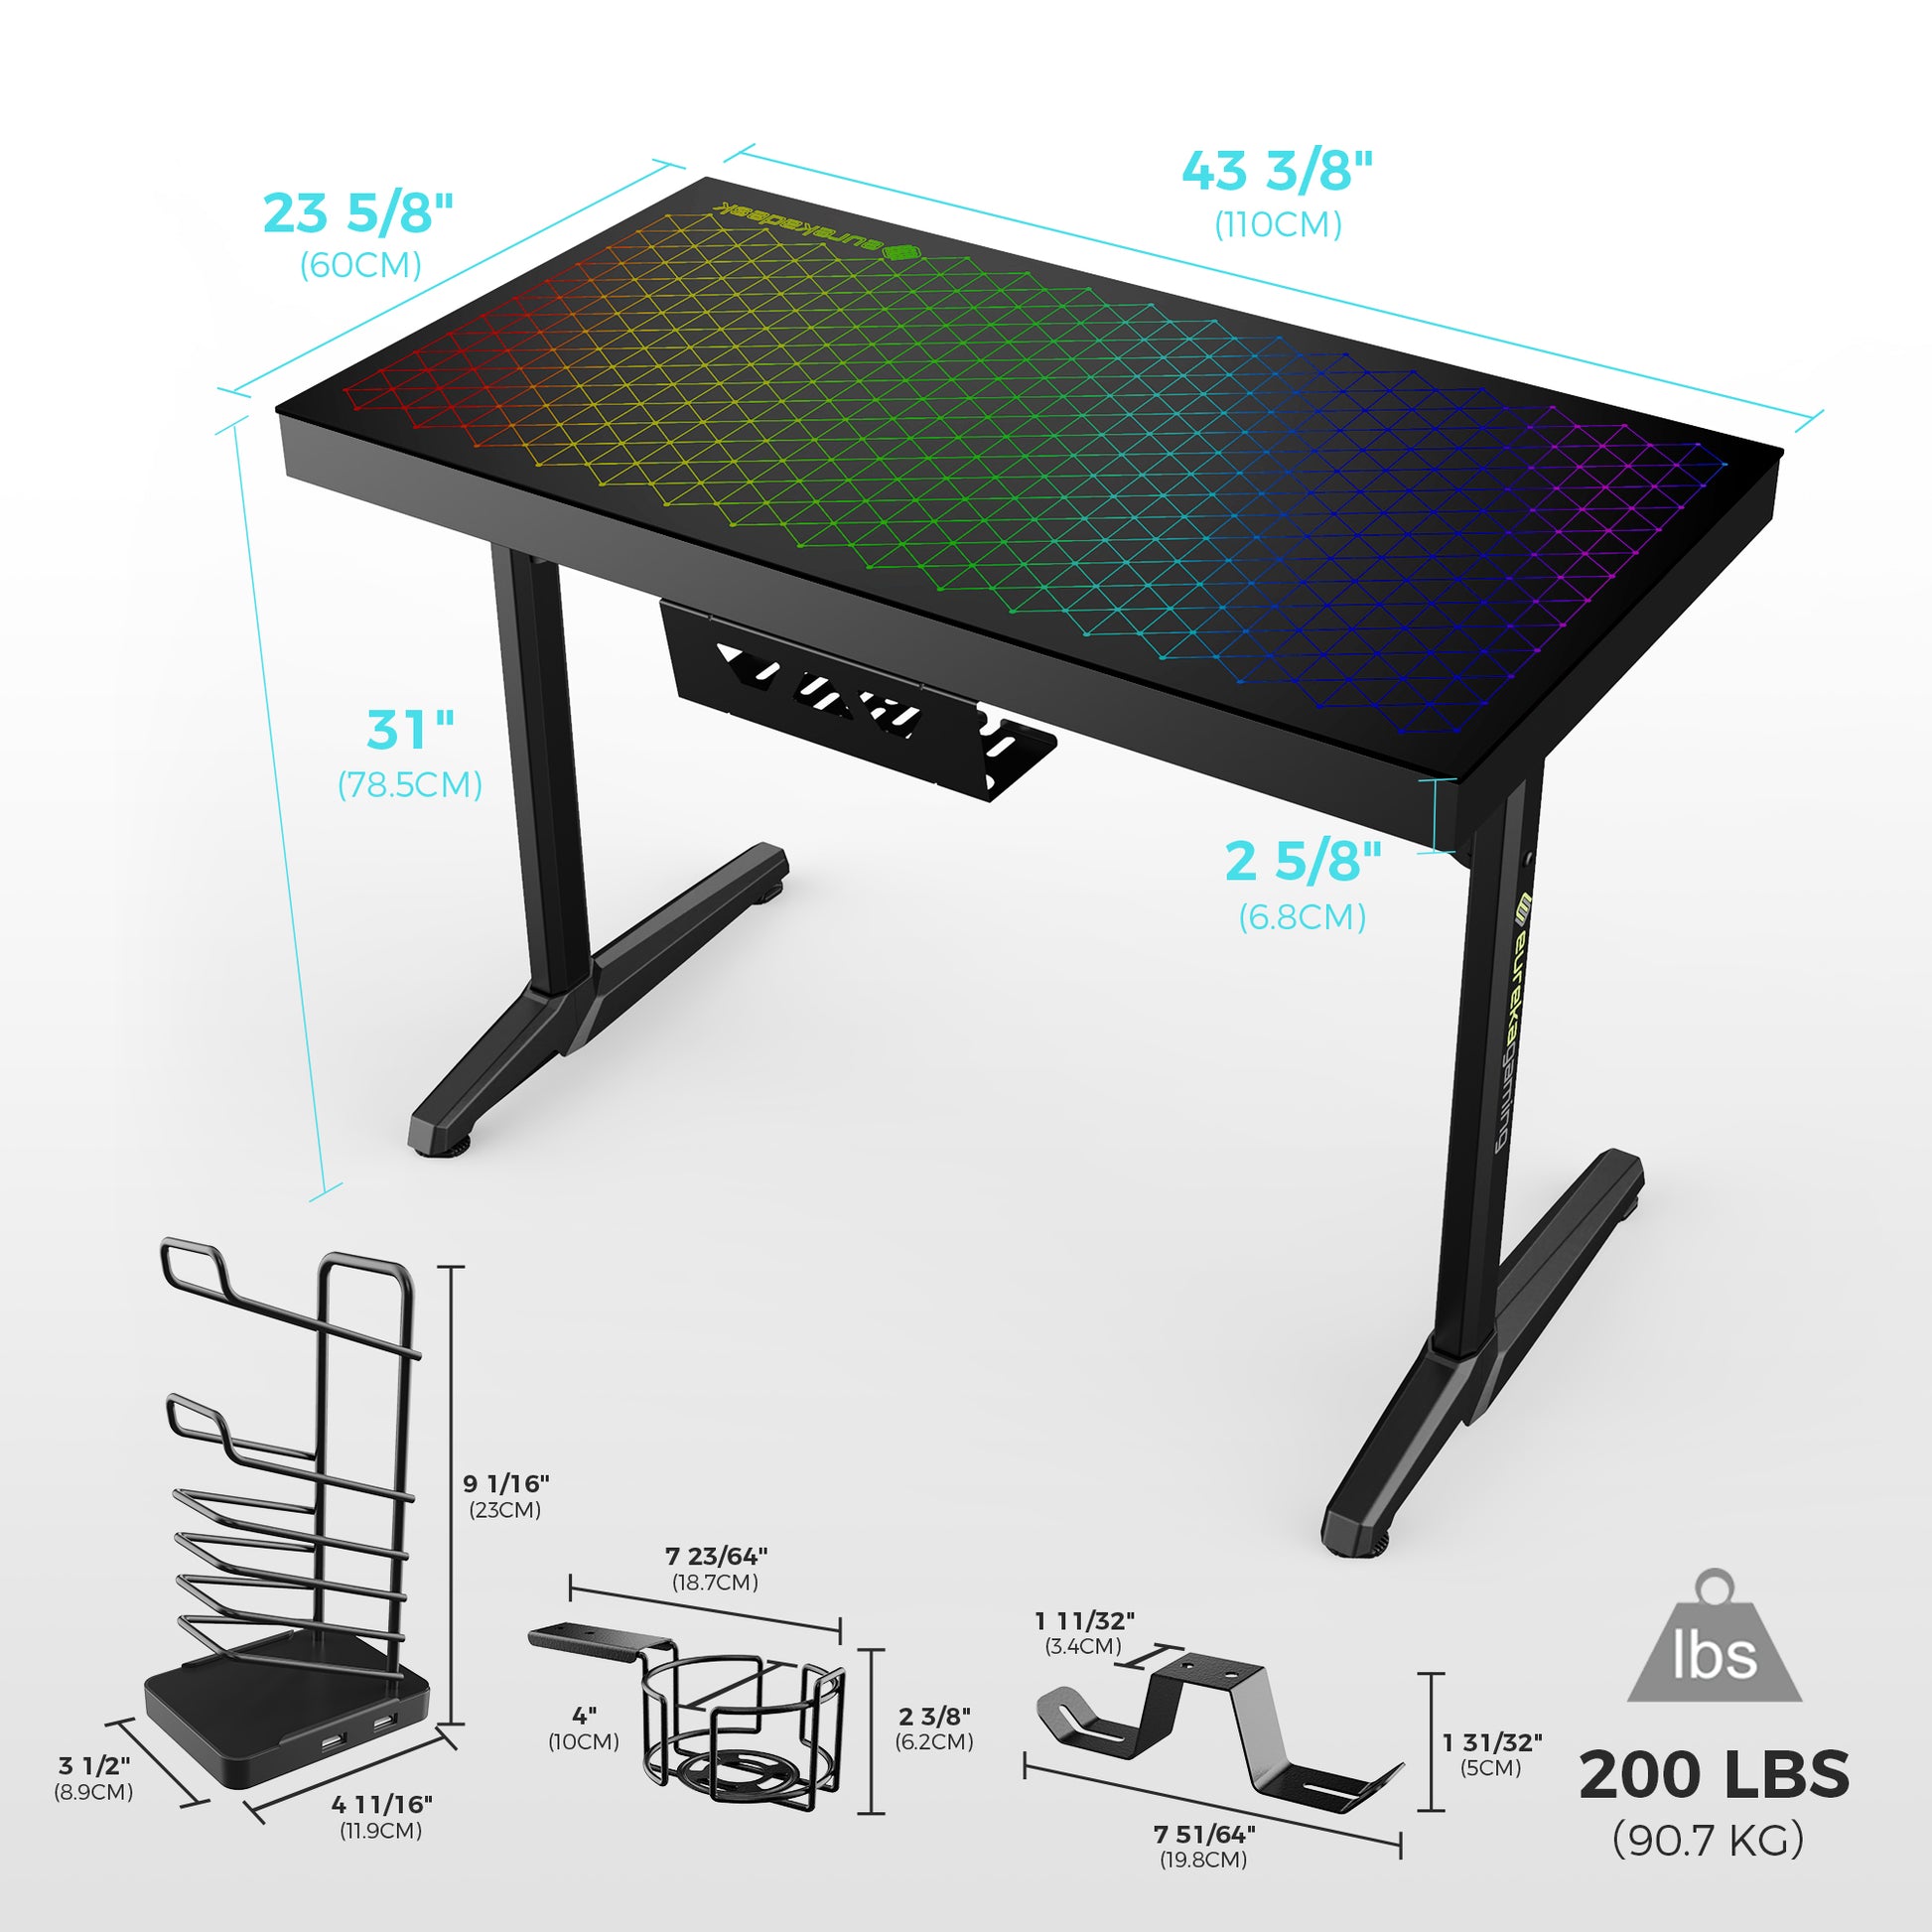 GTG-I43 43 inch Glass RGB Desktop Gaming Desk, Fixed Height Desk, with Accessory Set, Product Dimensions